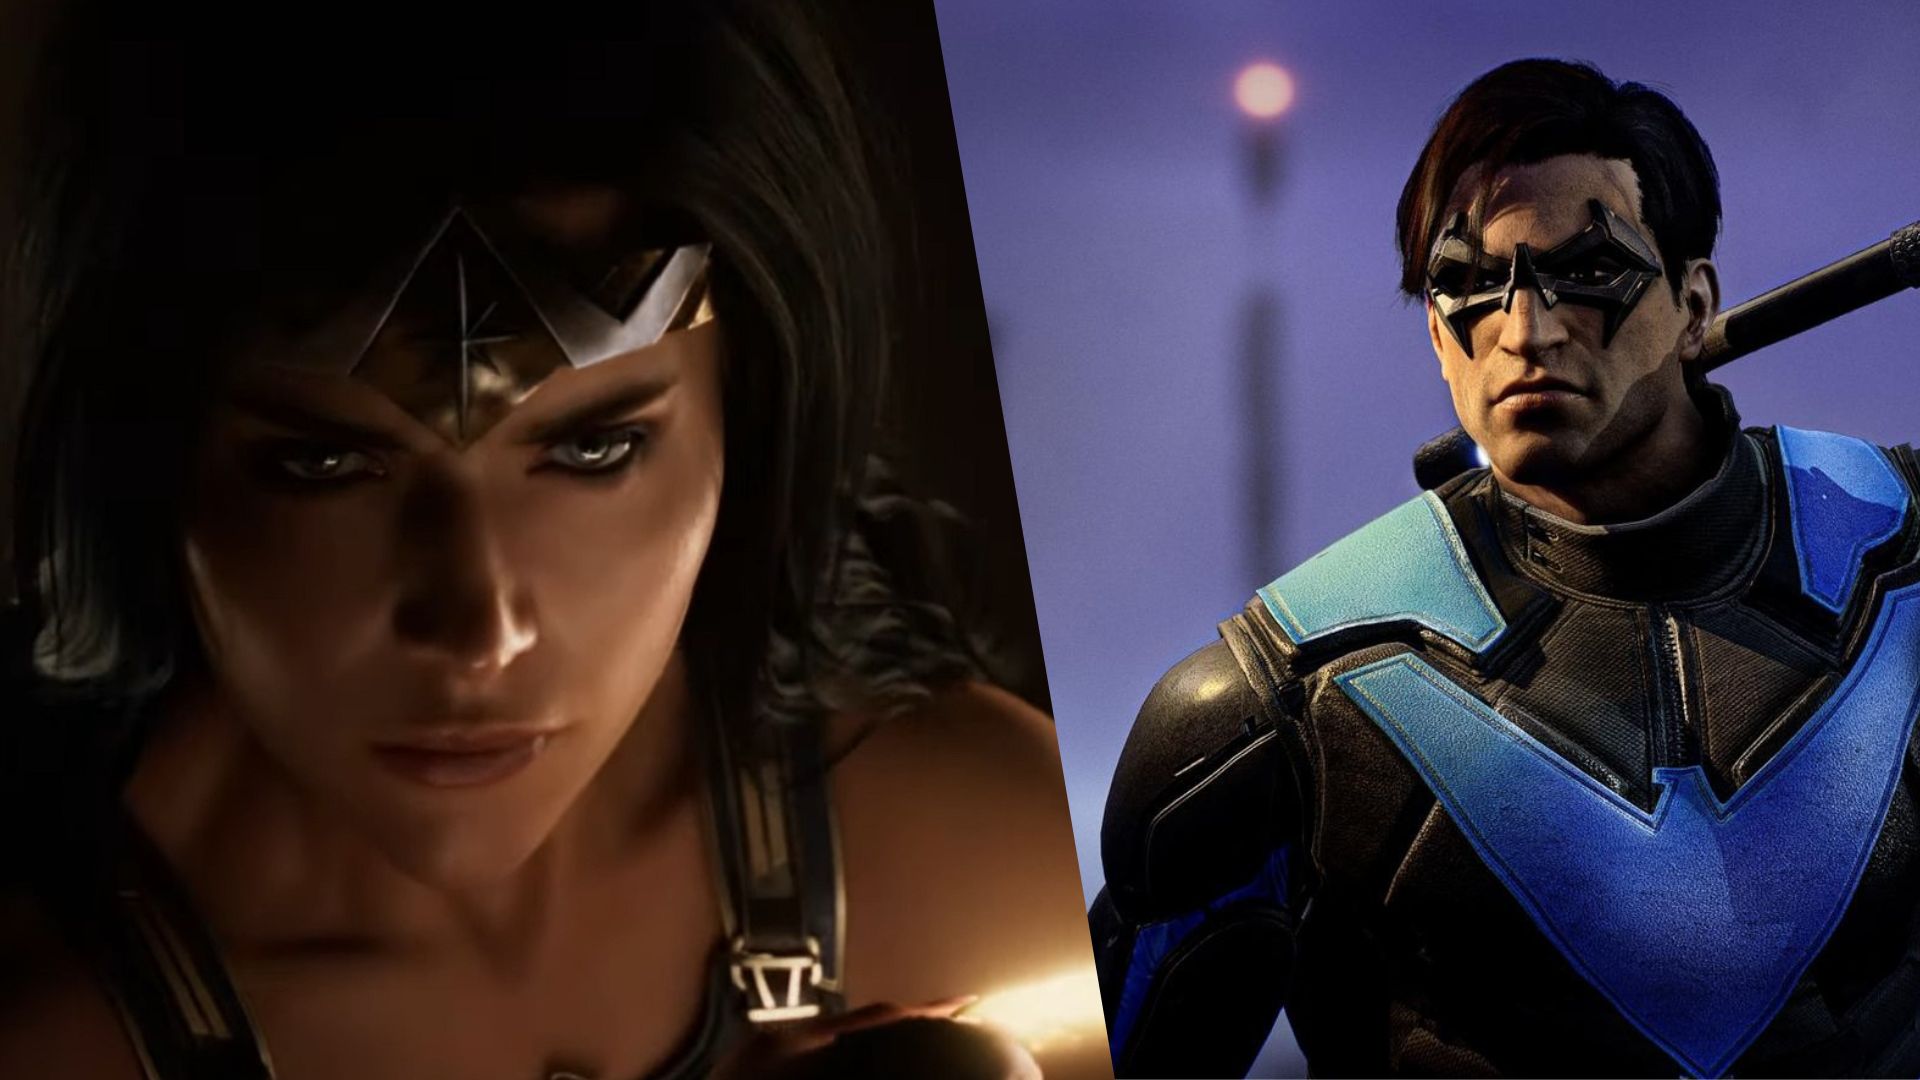 Warner Bros Montreal Supports Monolith Productions on the Wonder Woman Game